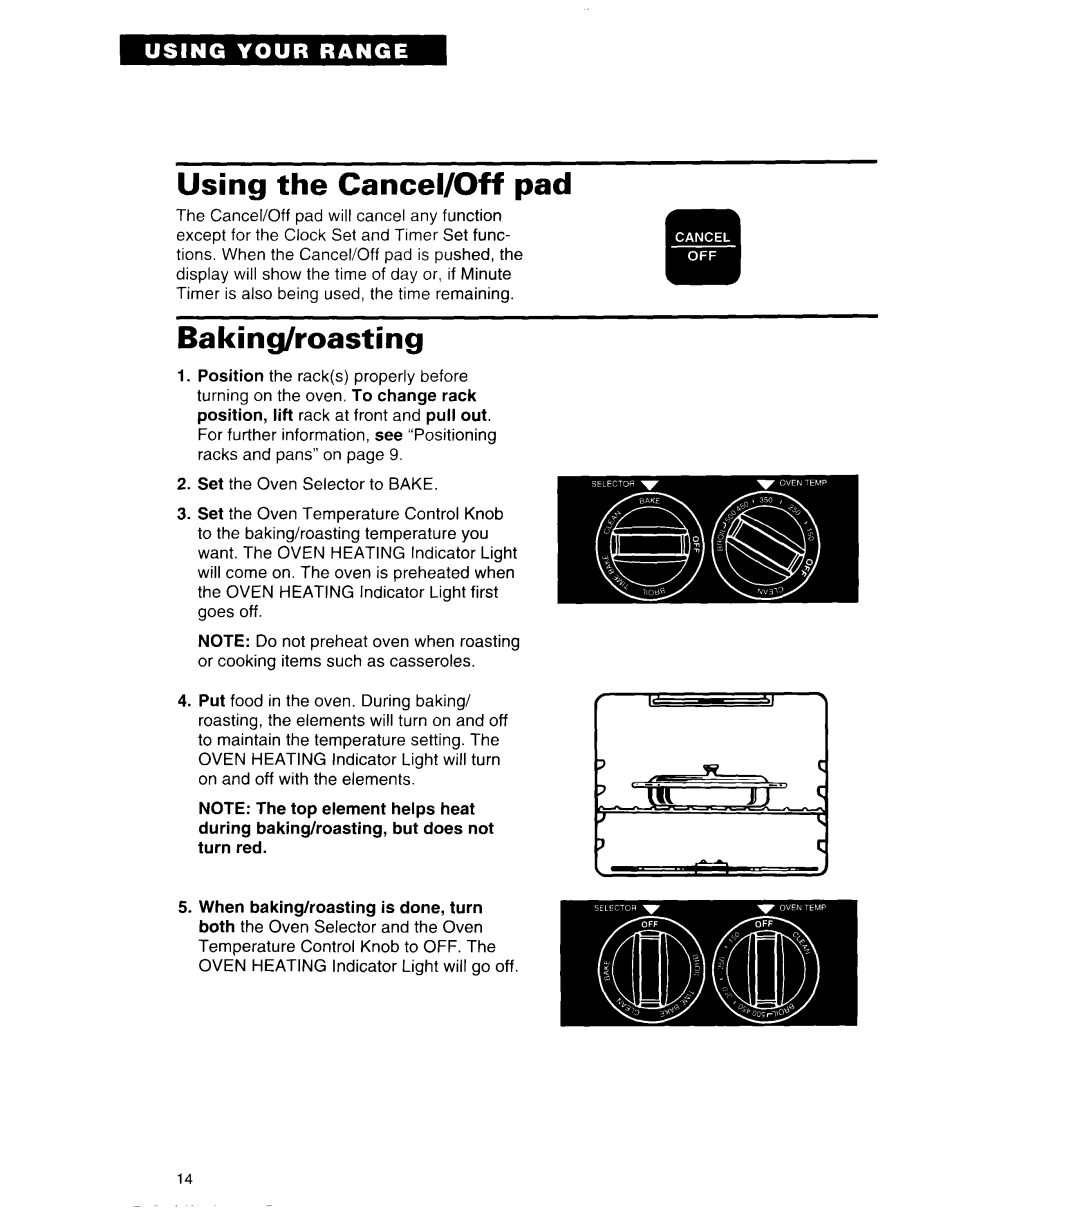 Whirlpool TER56W2B important safety instructions Using the Cancel/Off pad, Baking/roasting 